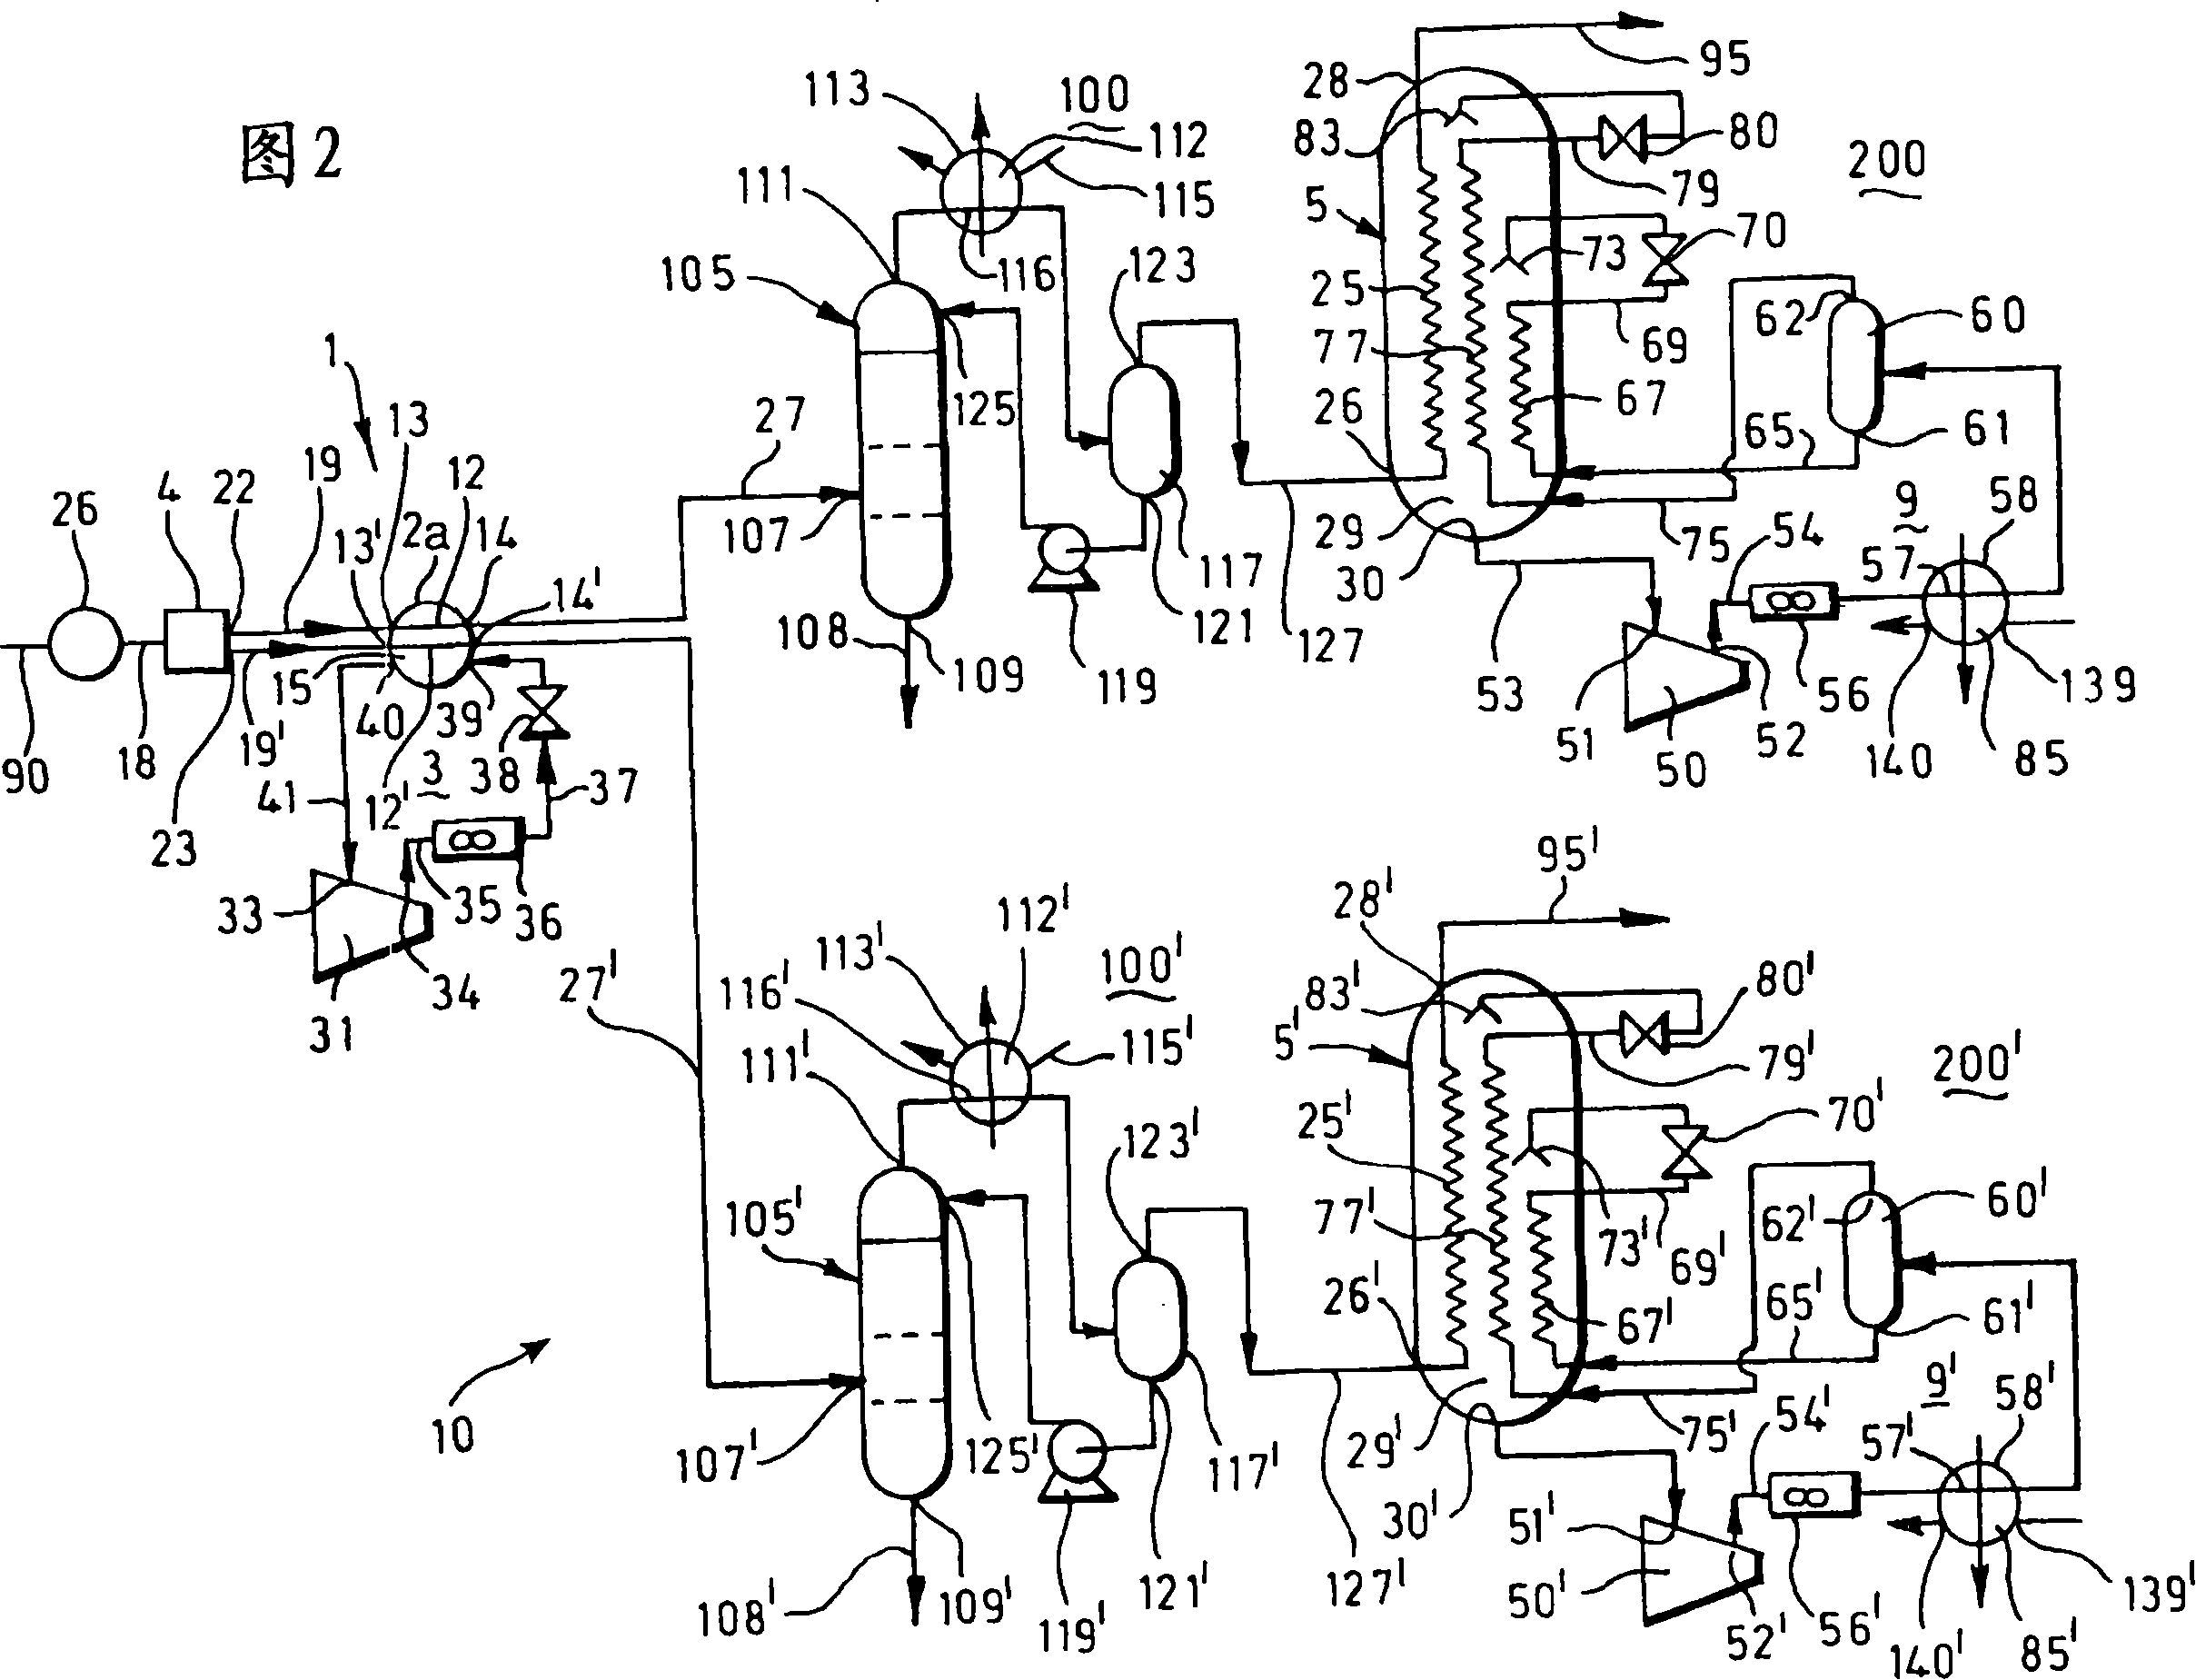 Plant and method for liquefying natural gas